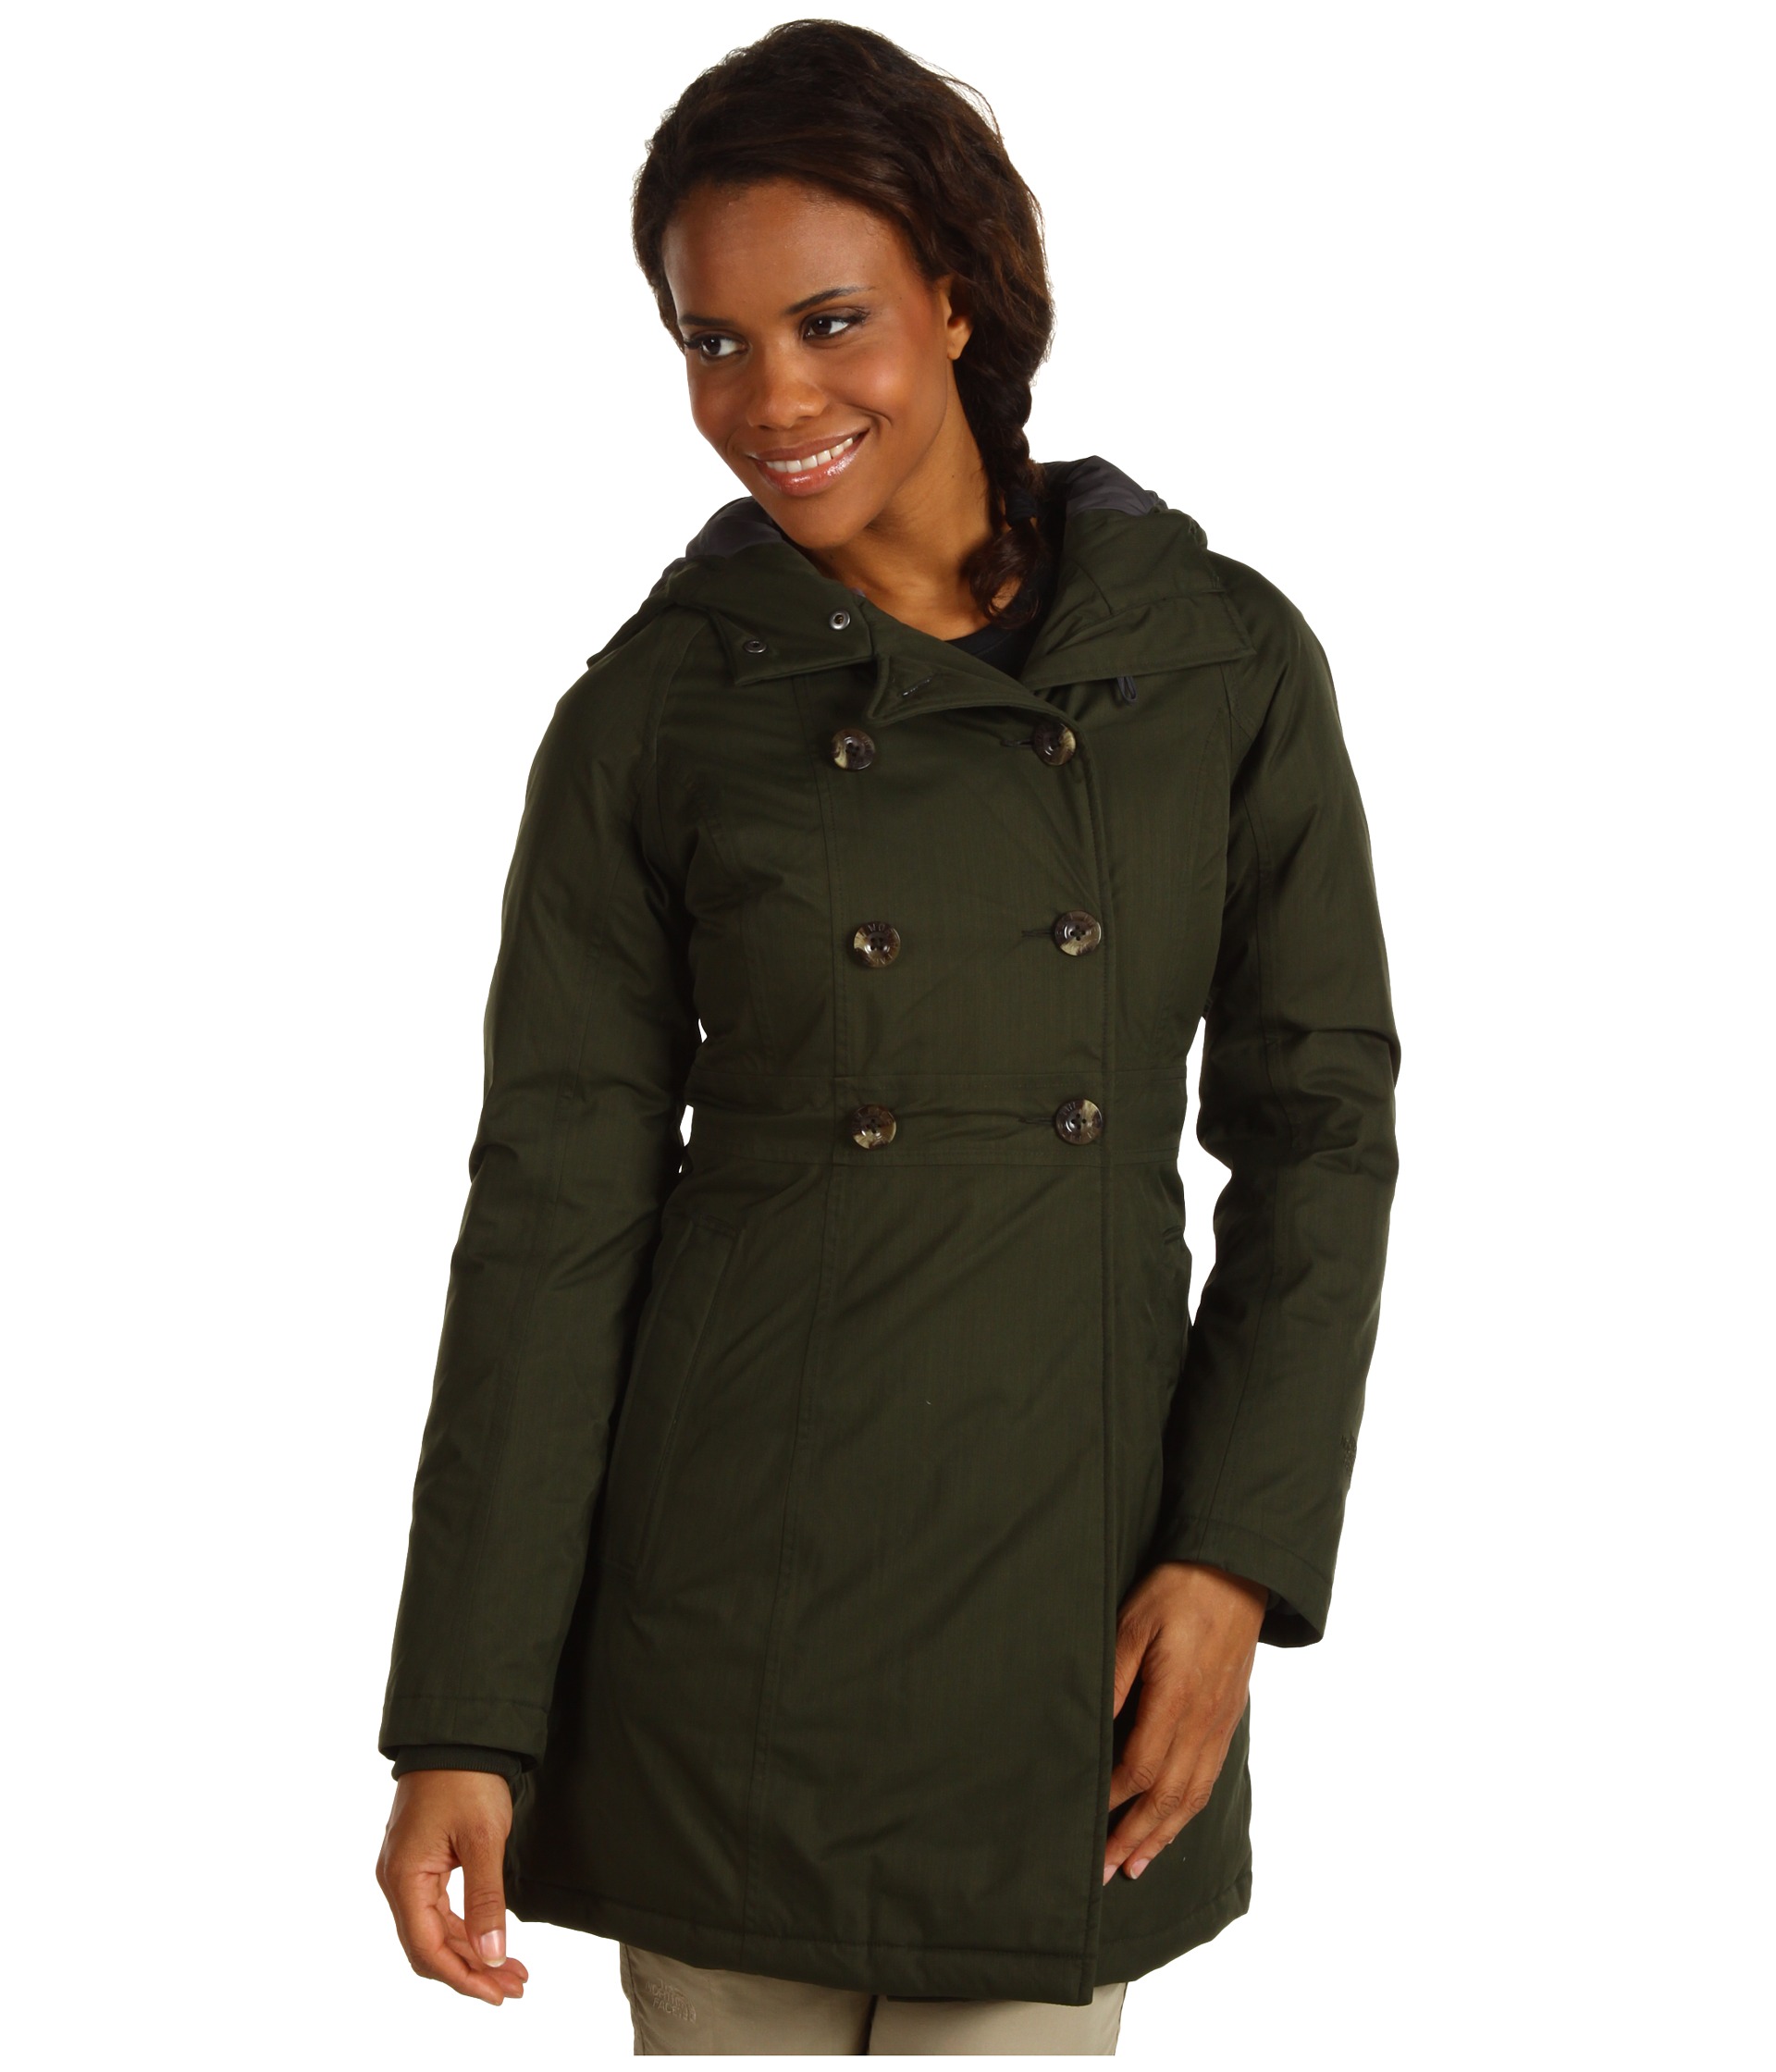 The North Face Womens Parkway Jacket $244.99 $349.00  